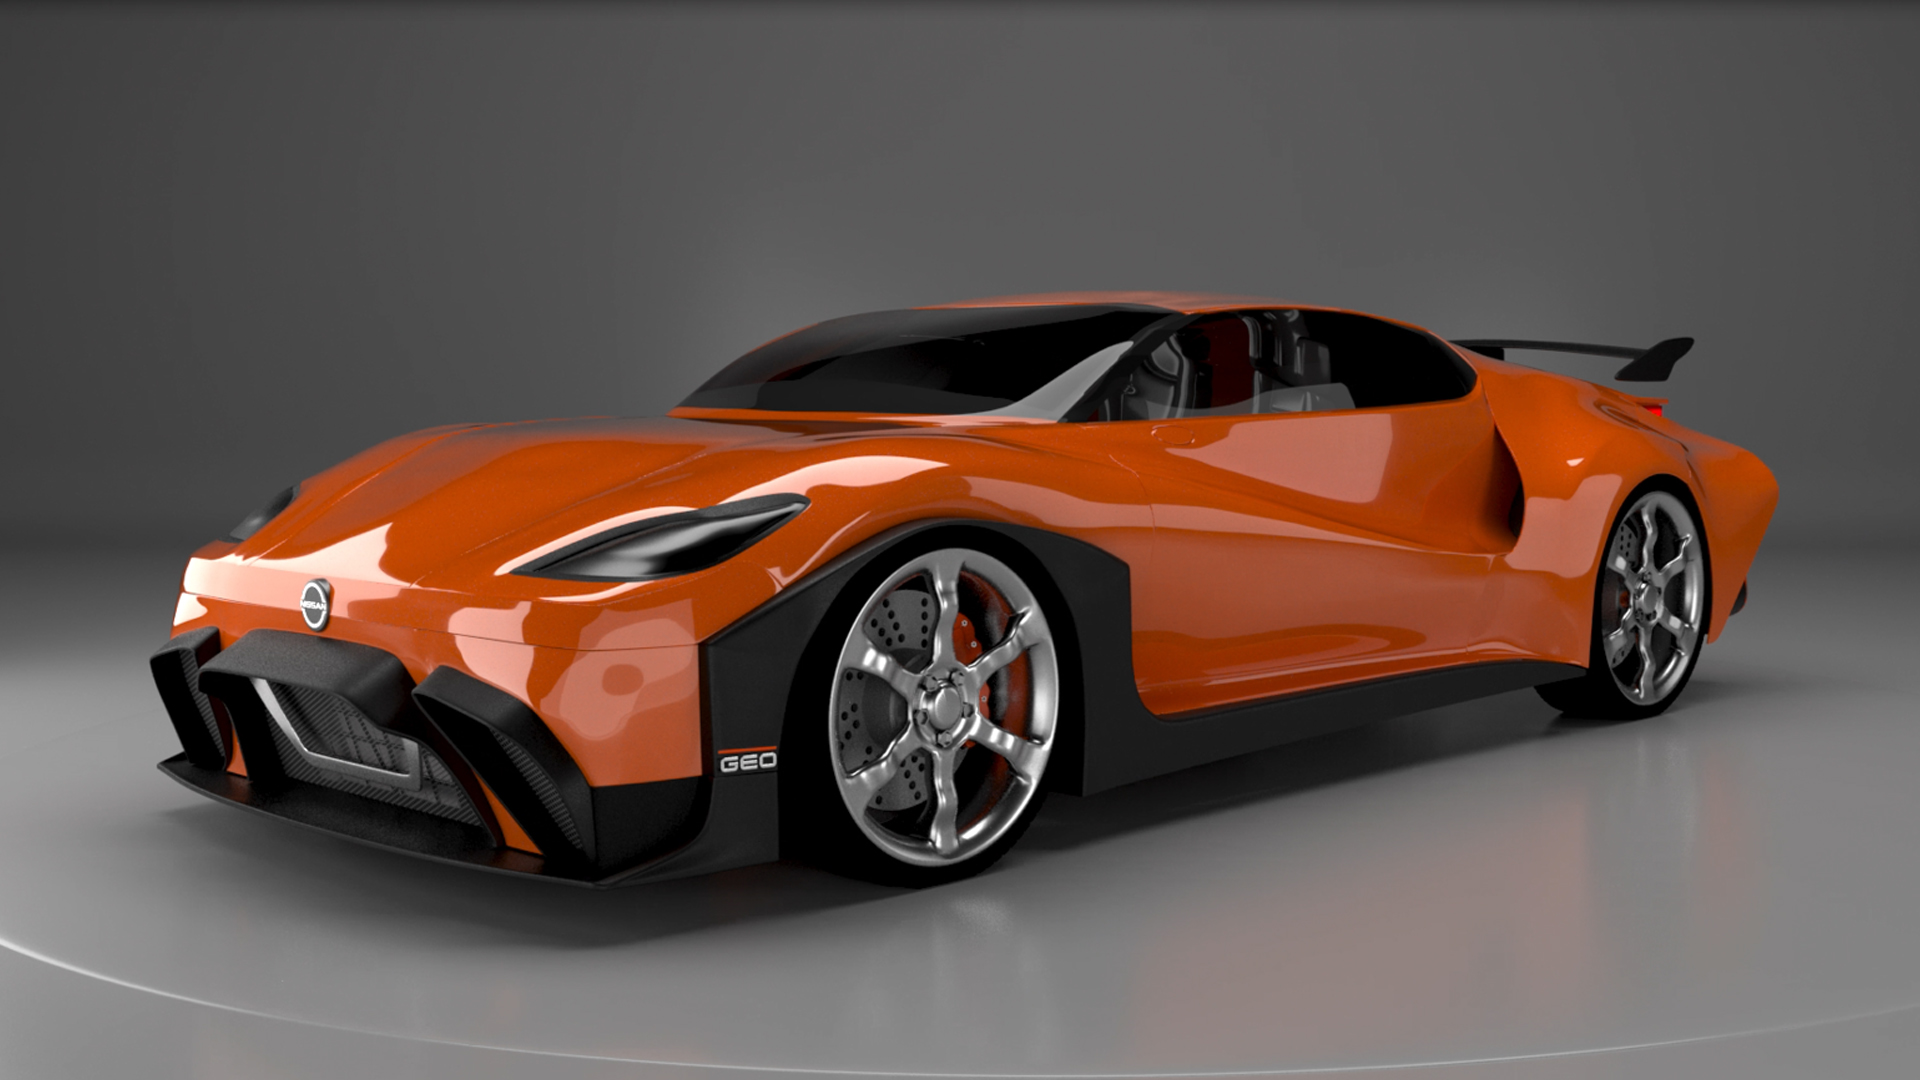 BA Visual effects work by Emily Woodhead, showing a turntable video of a sporty, modern supercar 3D model.